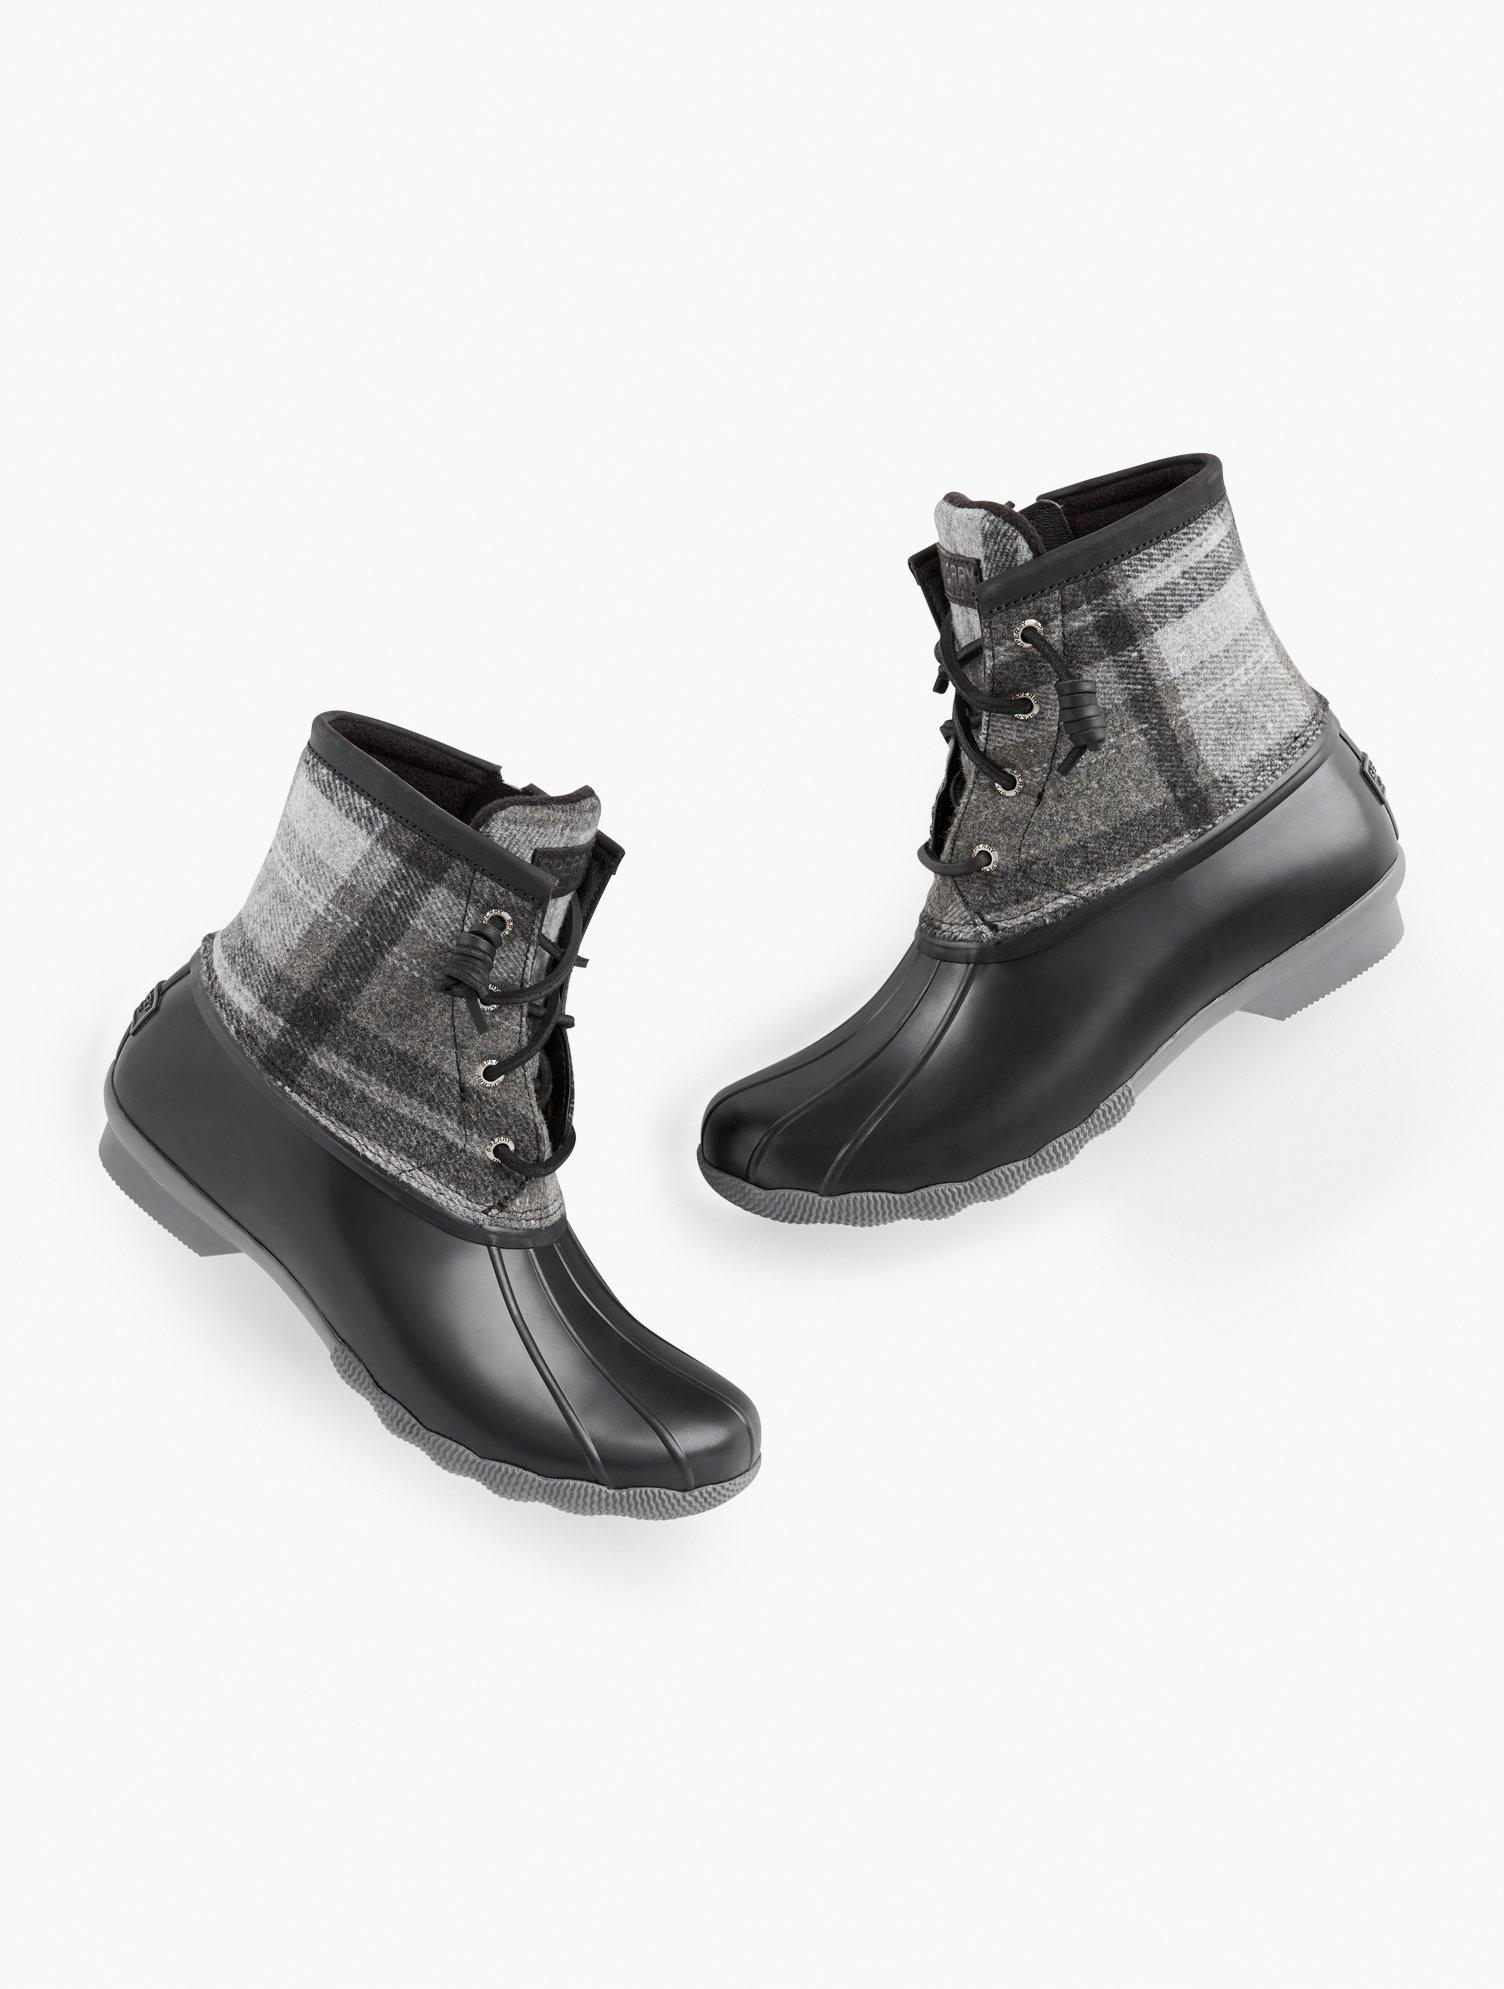 Sperry Top-Sider Saltwater All Weather Boots in Black | Lyst